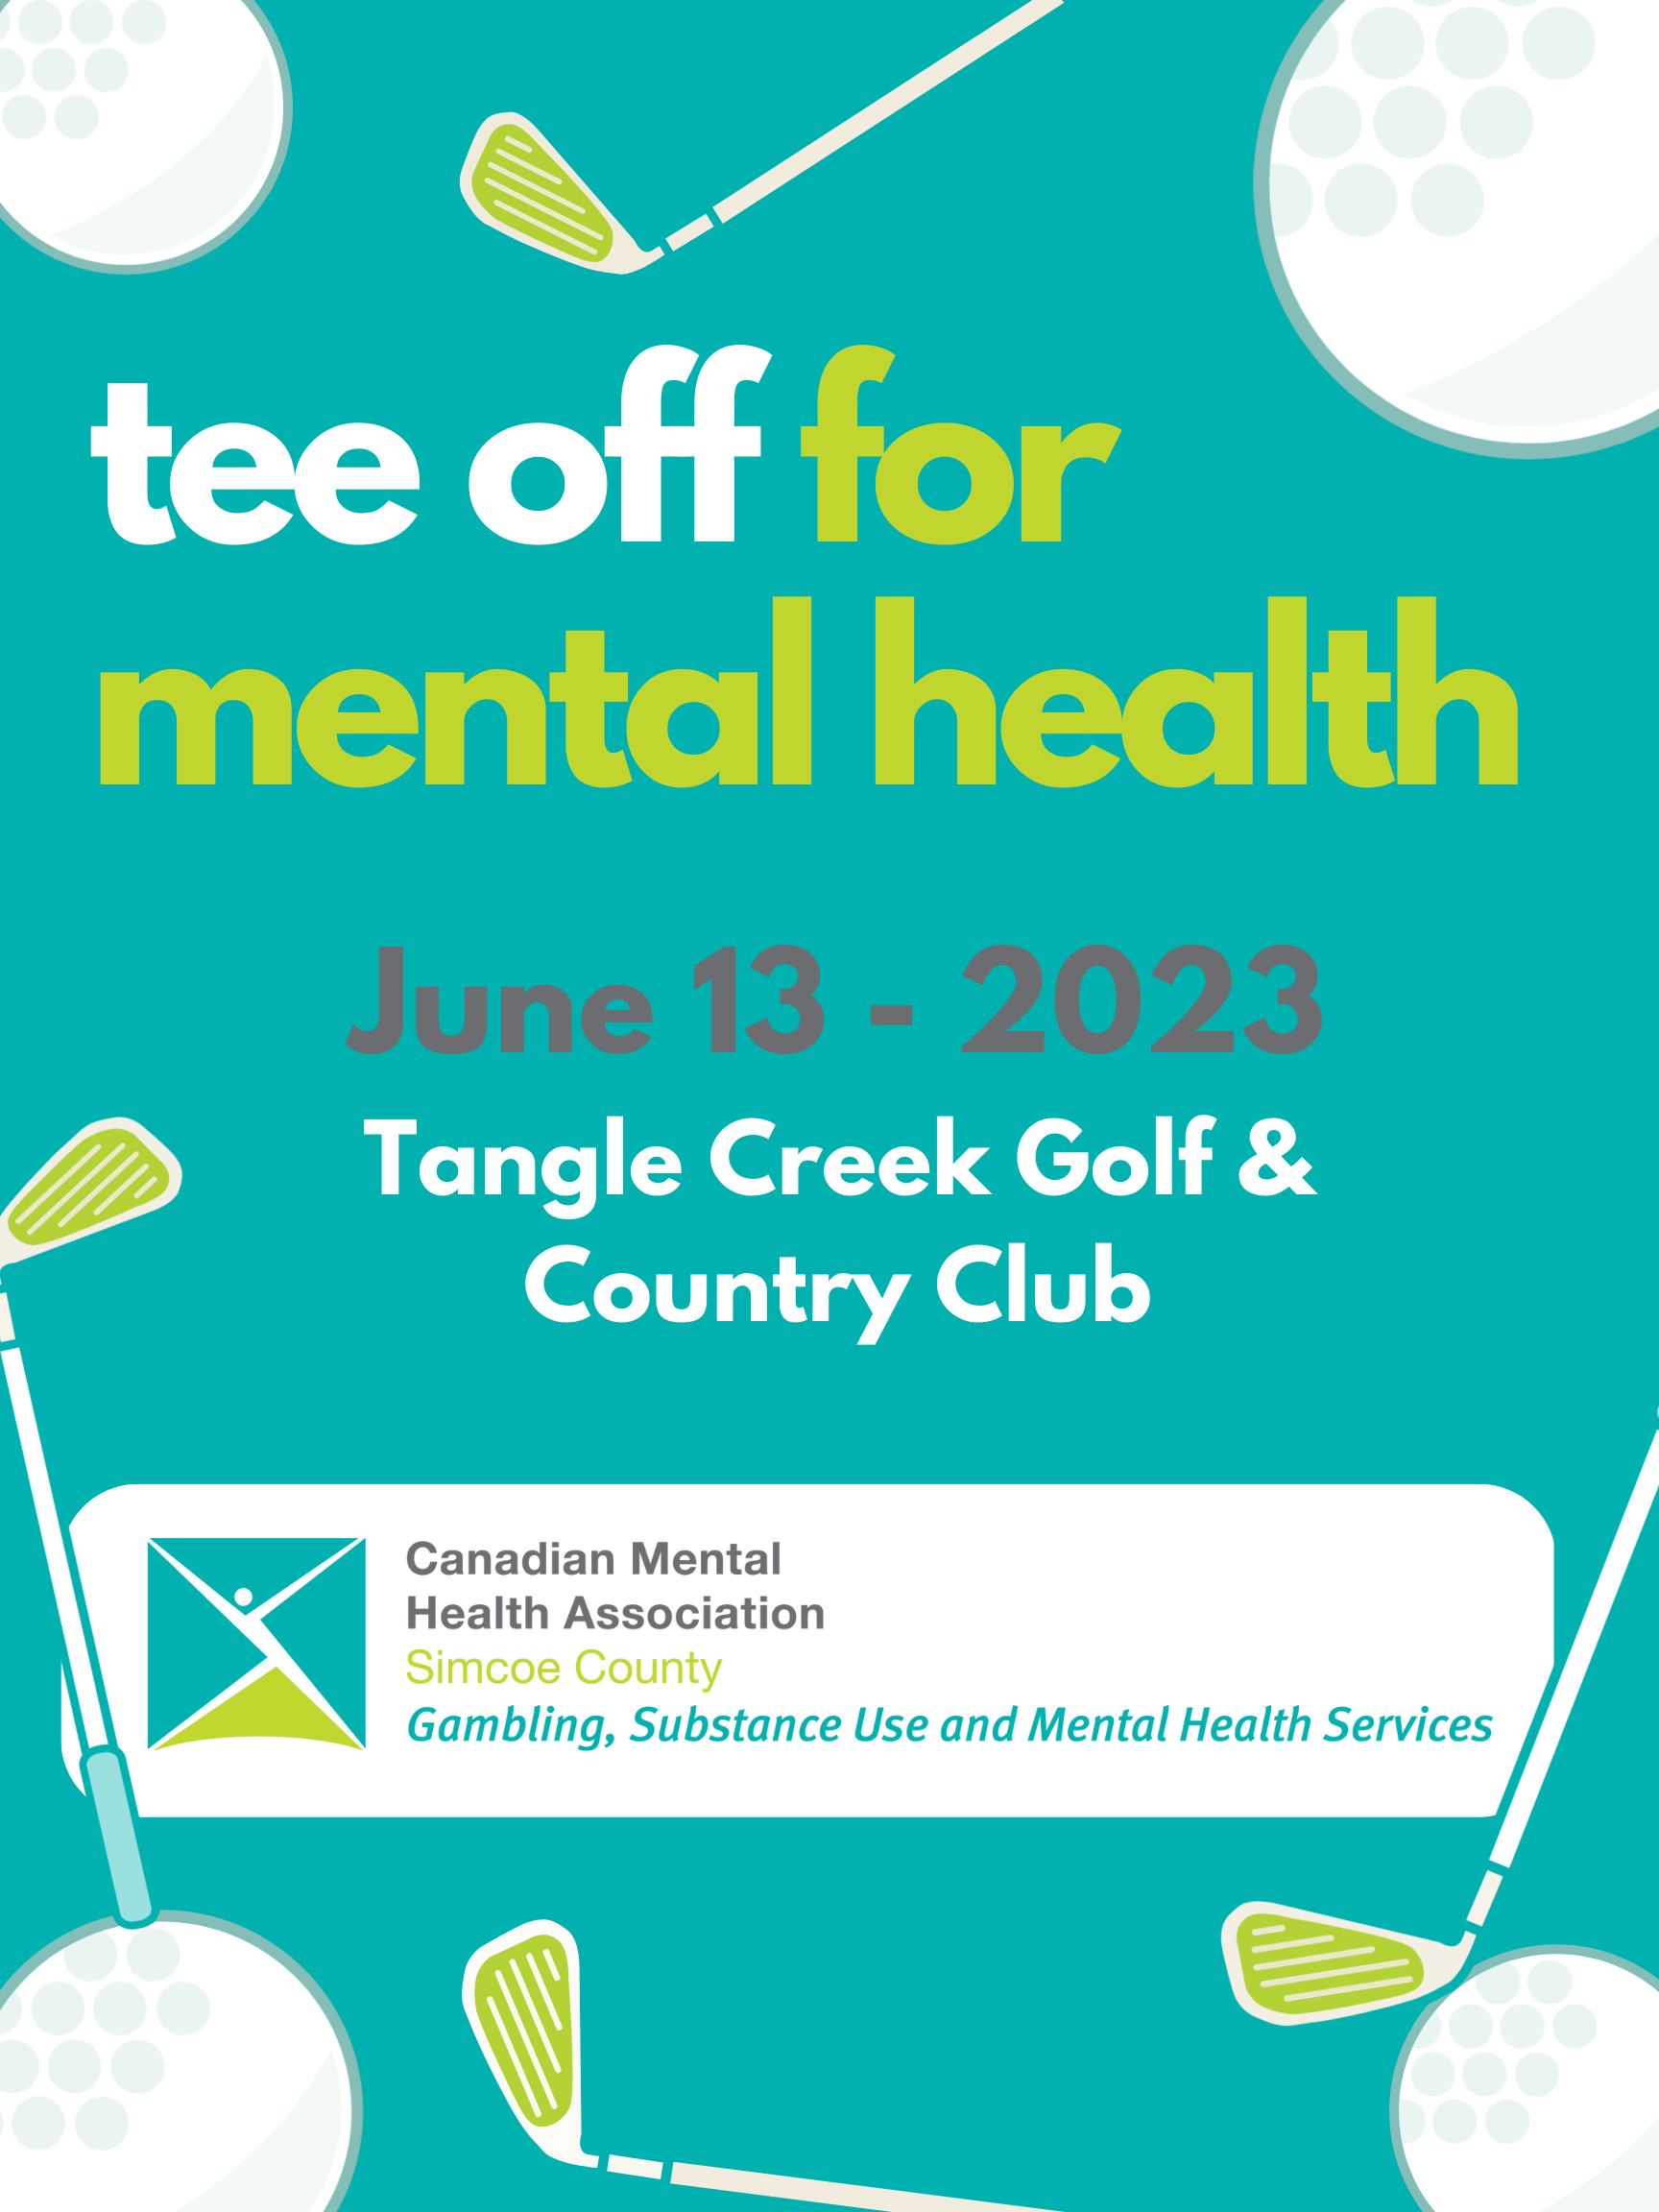 Tee Off For Mental Health!